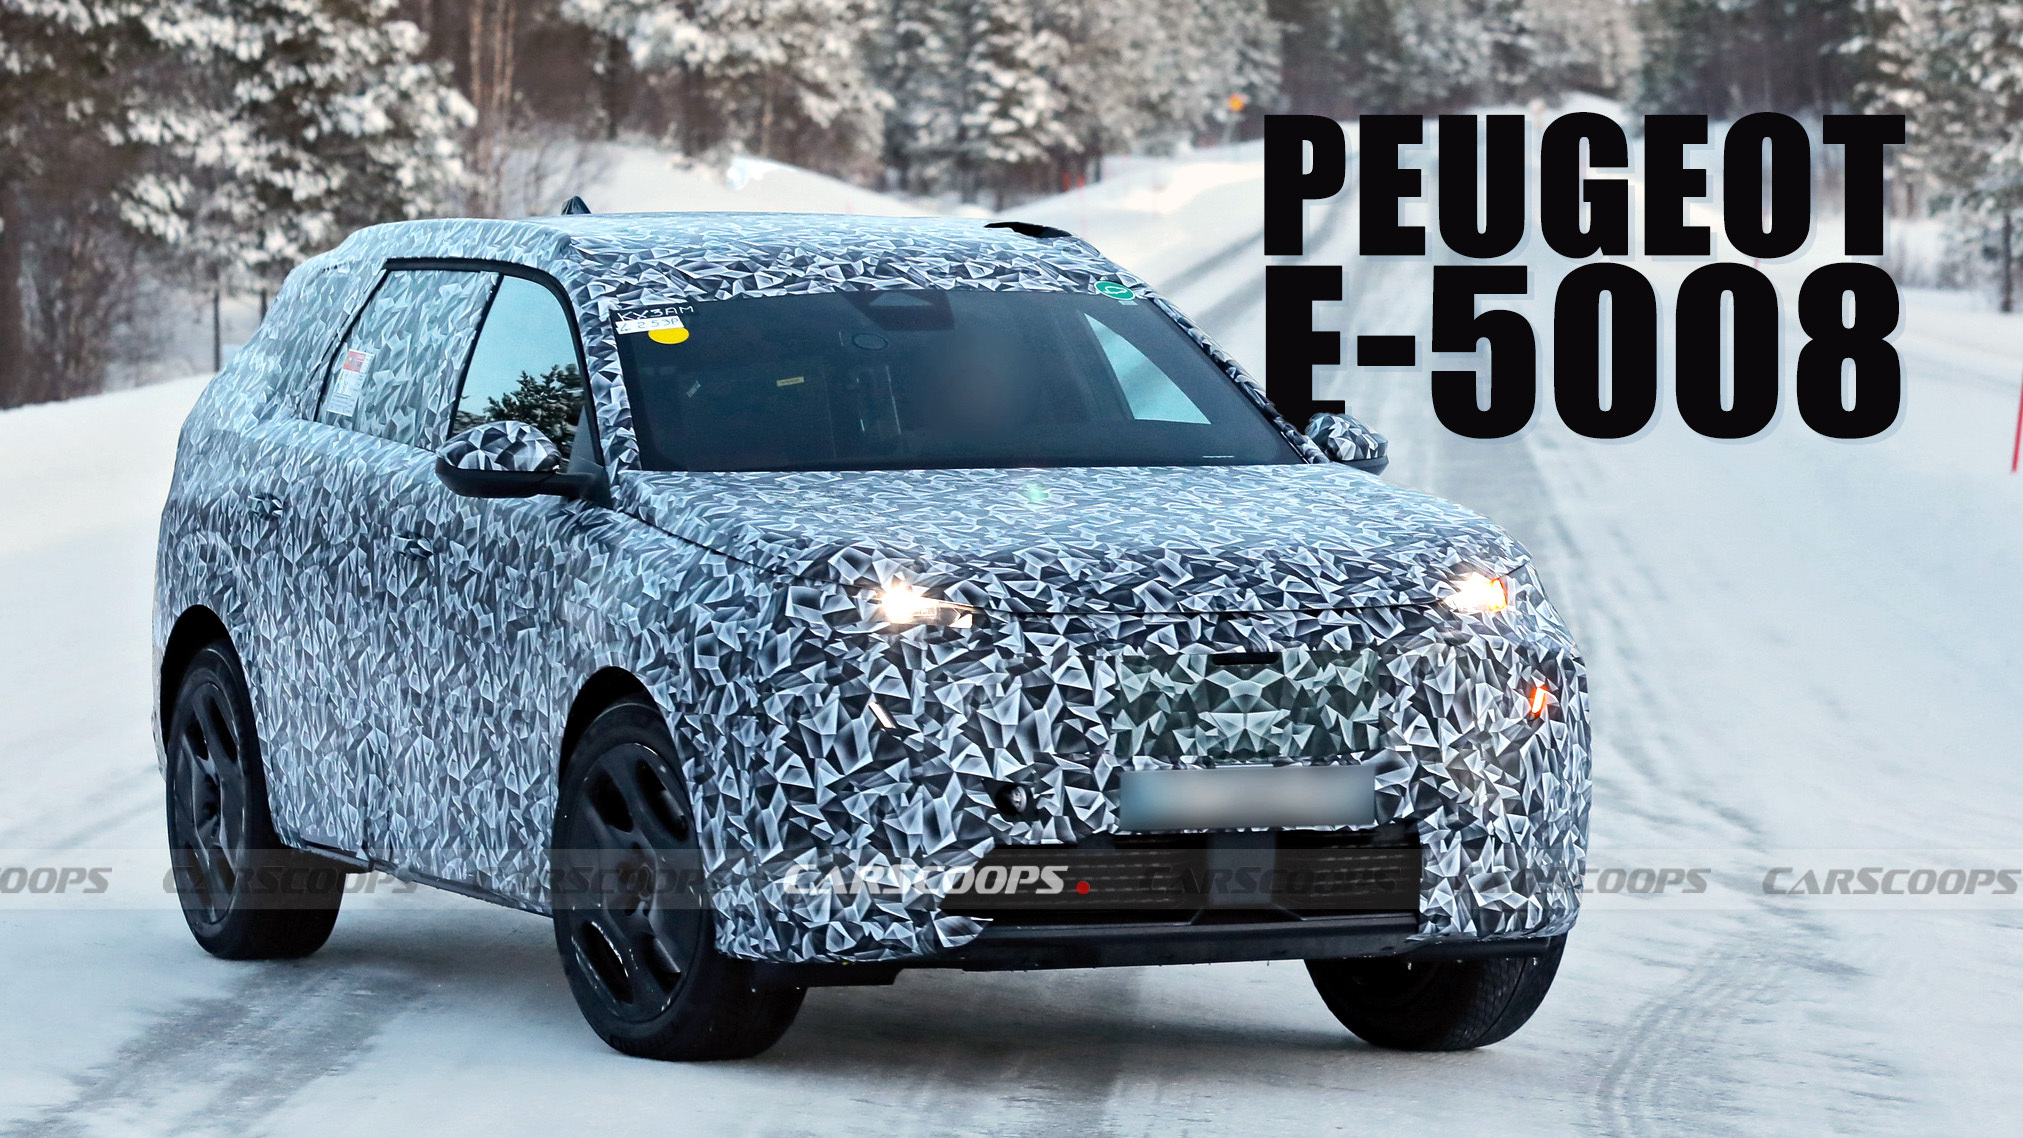 Peugeot E-5008 Spied Showing Boxy Appearance For Future EV